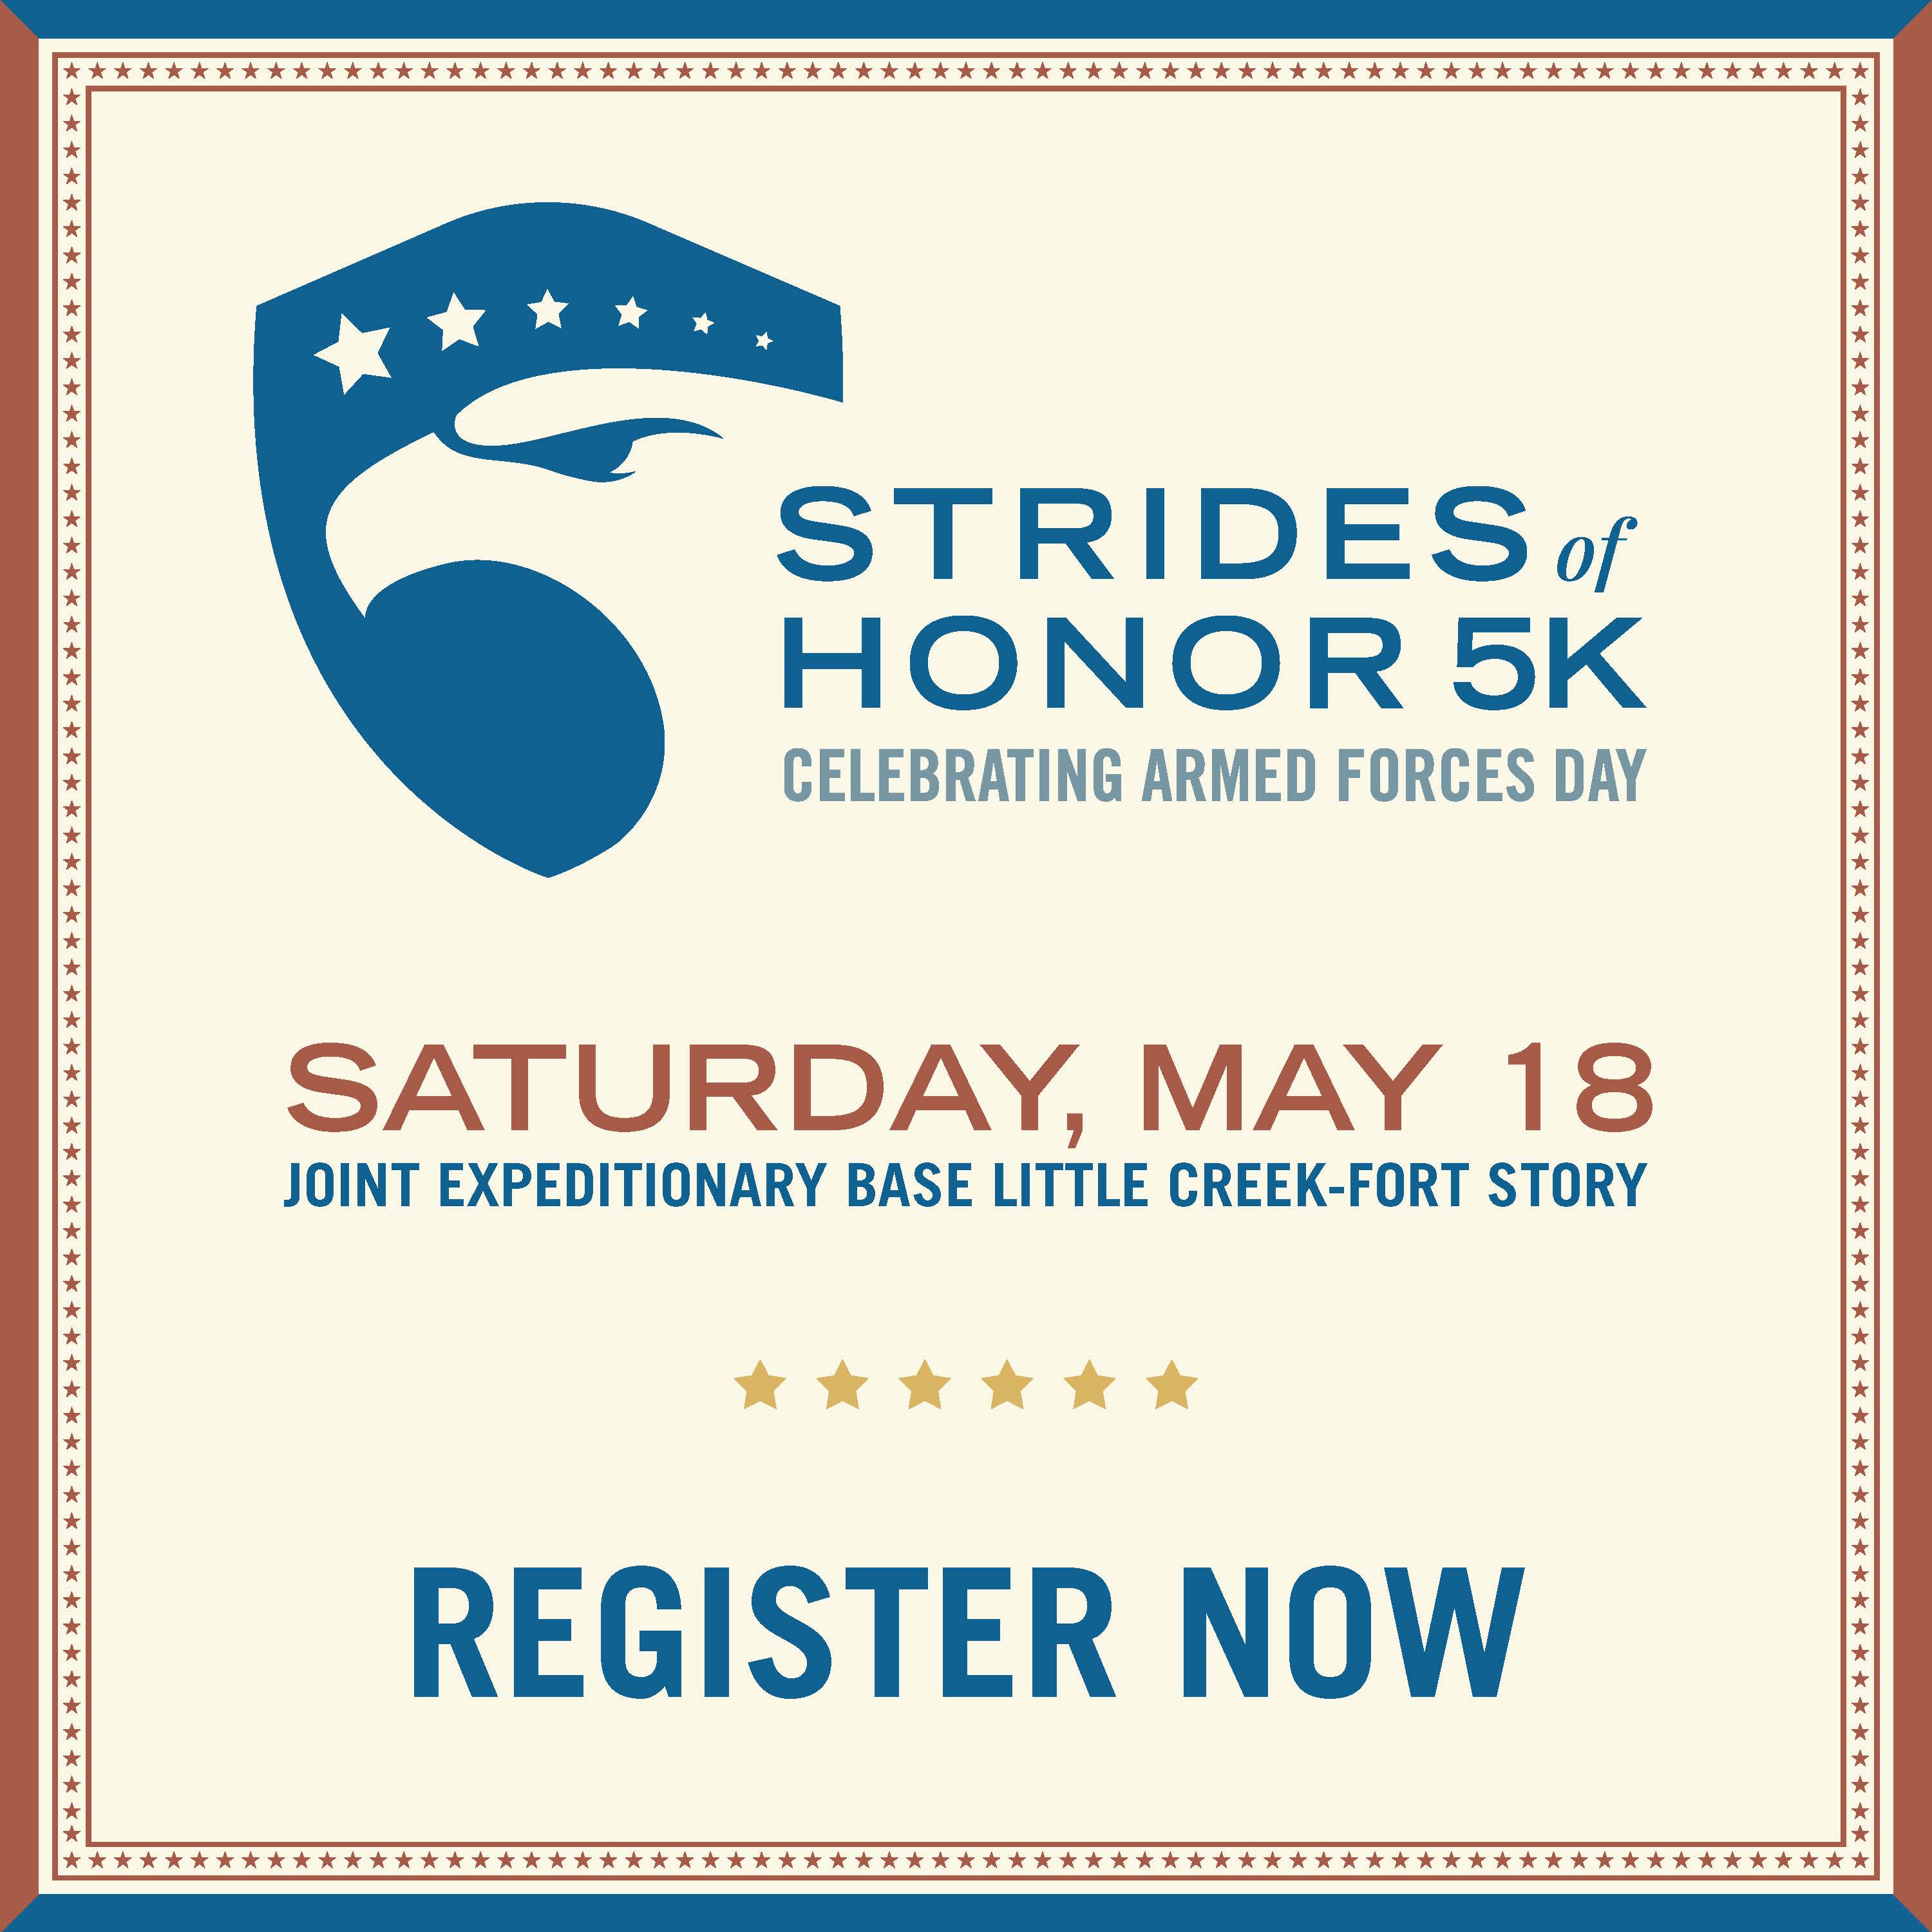 Strides of Honor 5K